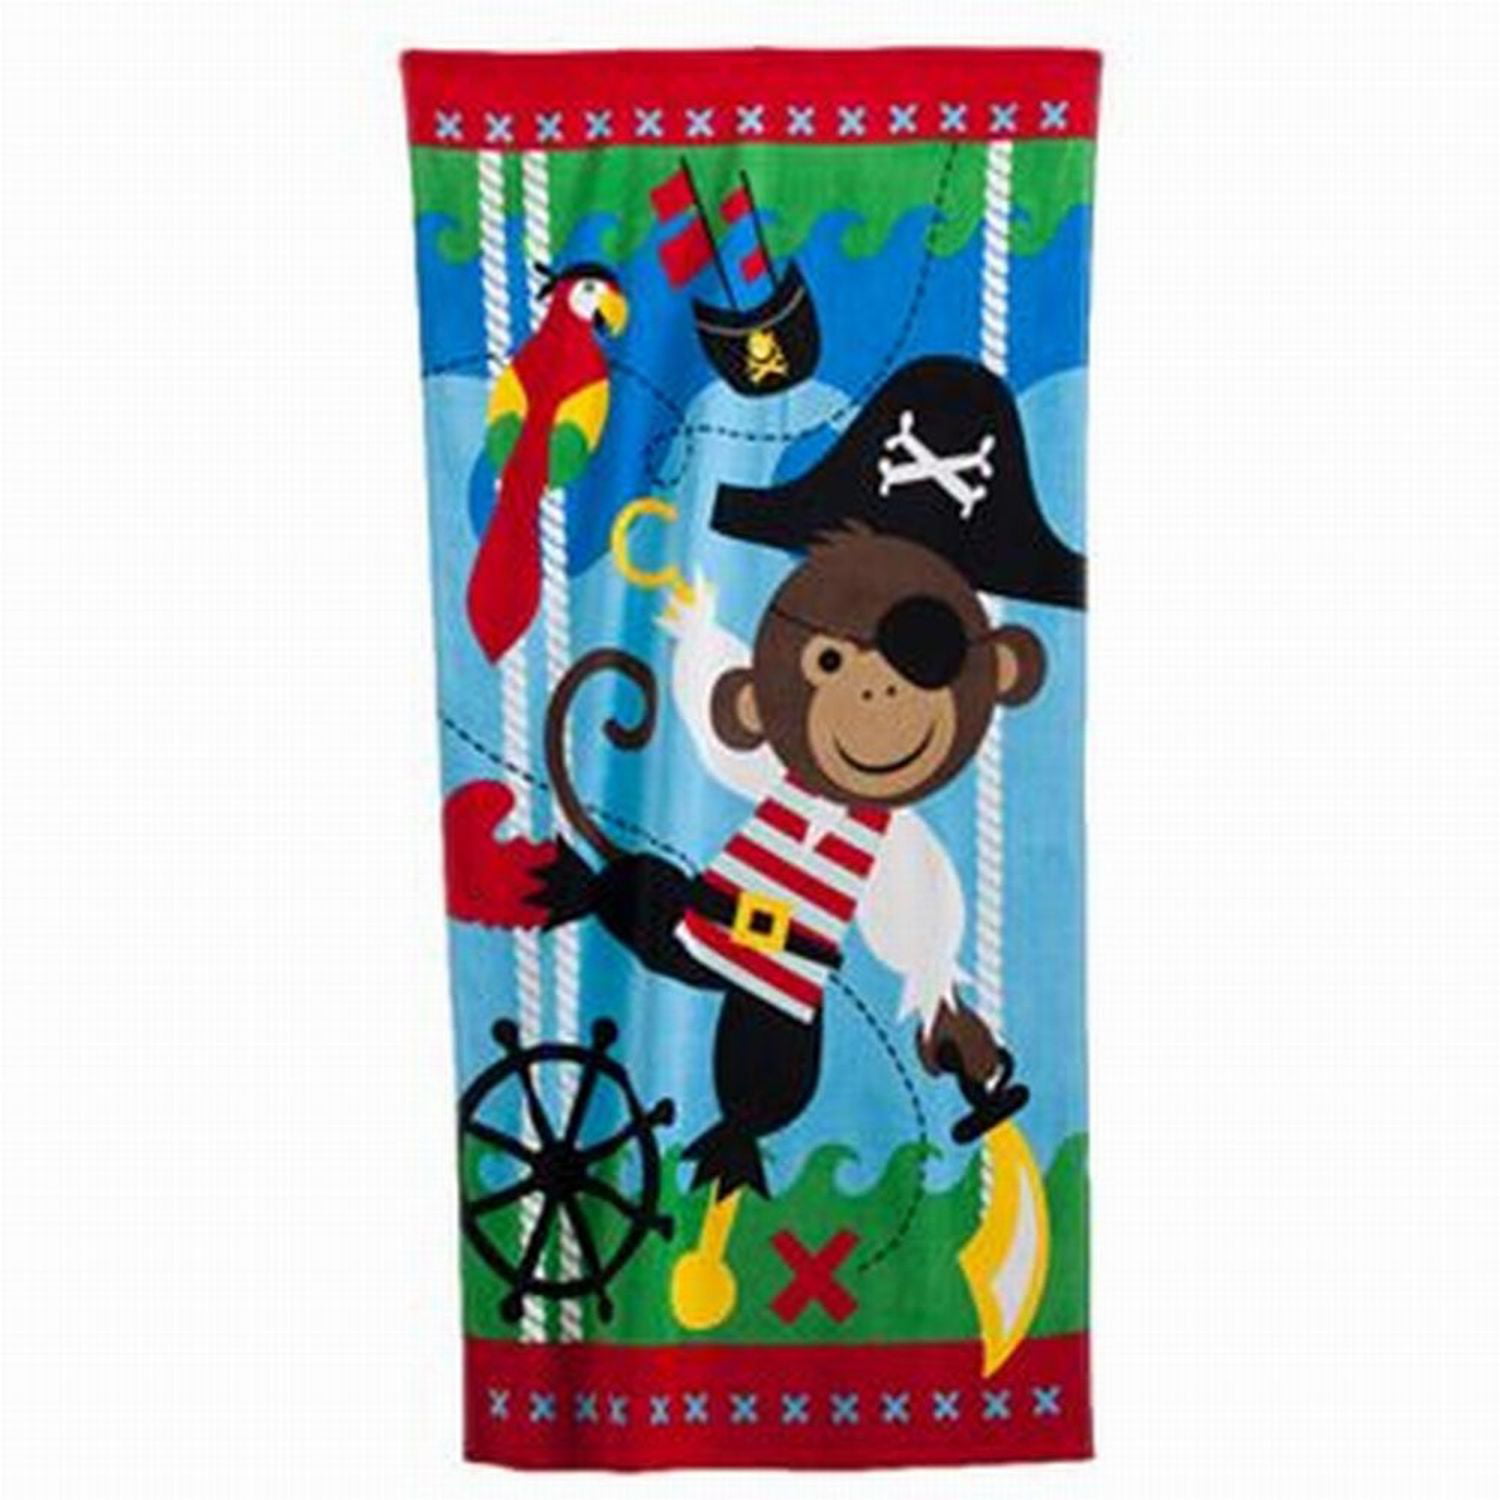 Outer Spaceman Beach Pool Towel 28x58 Velour/Terry Jumping Beans Kids NWT $26 